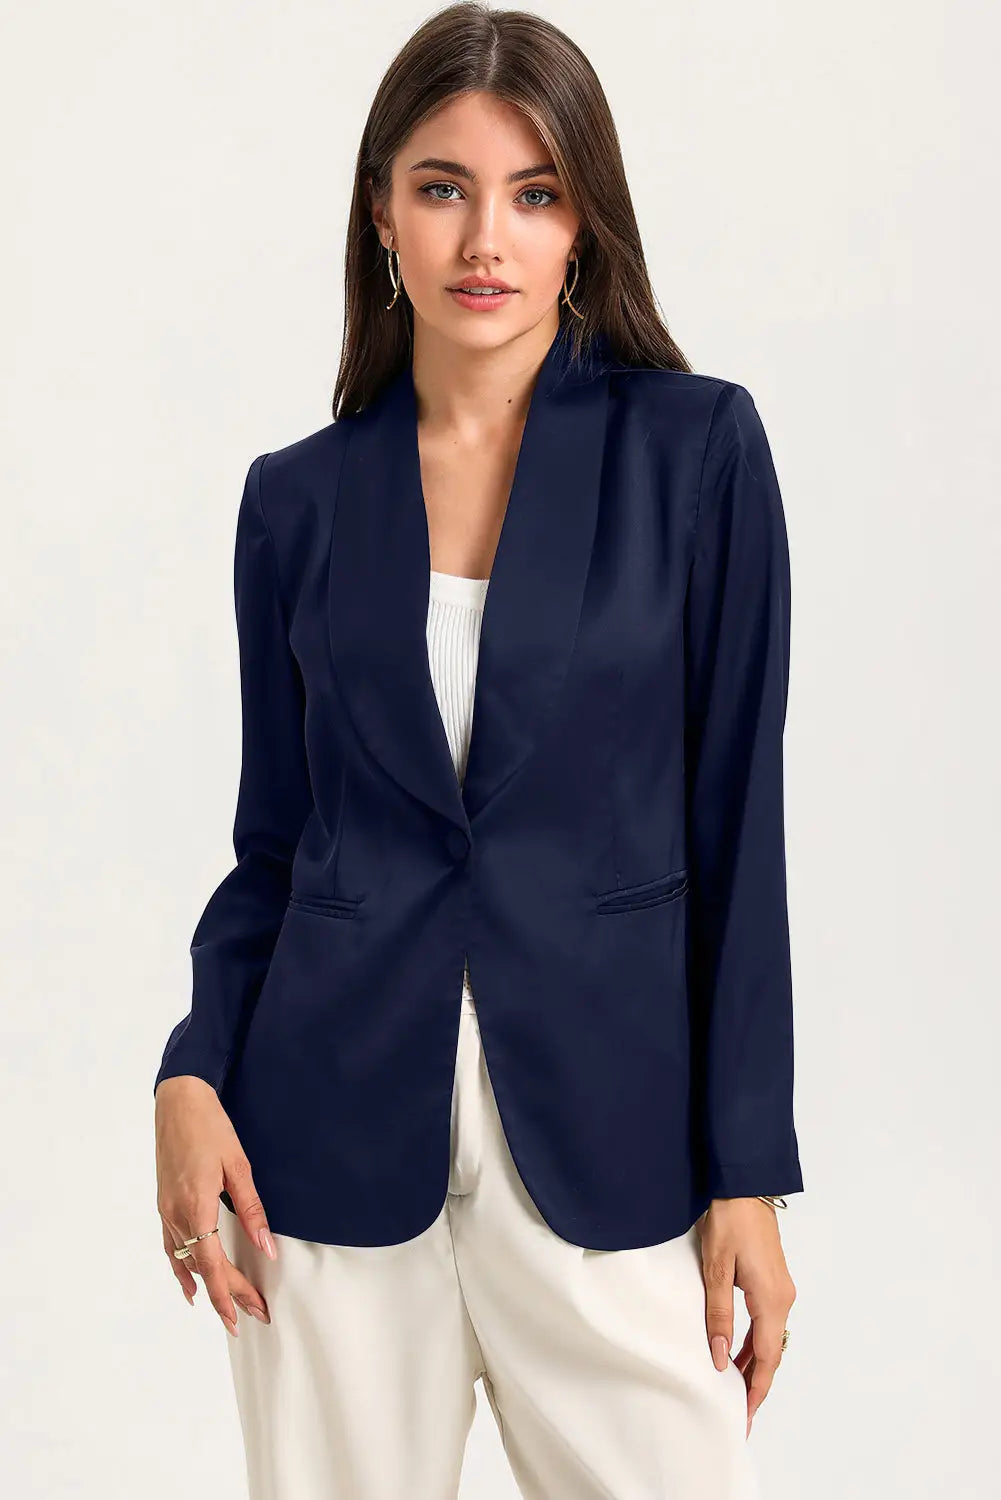 Black collared neck single breasted blazer with pockets - blue / s / 90% polyester + 10% elastane - blazers